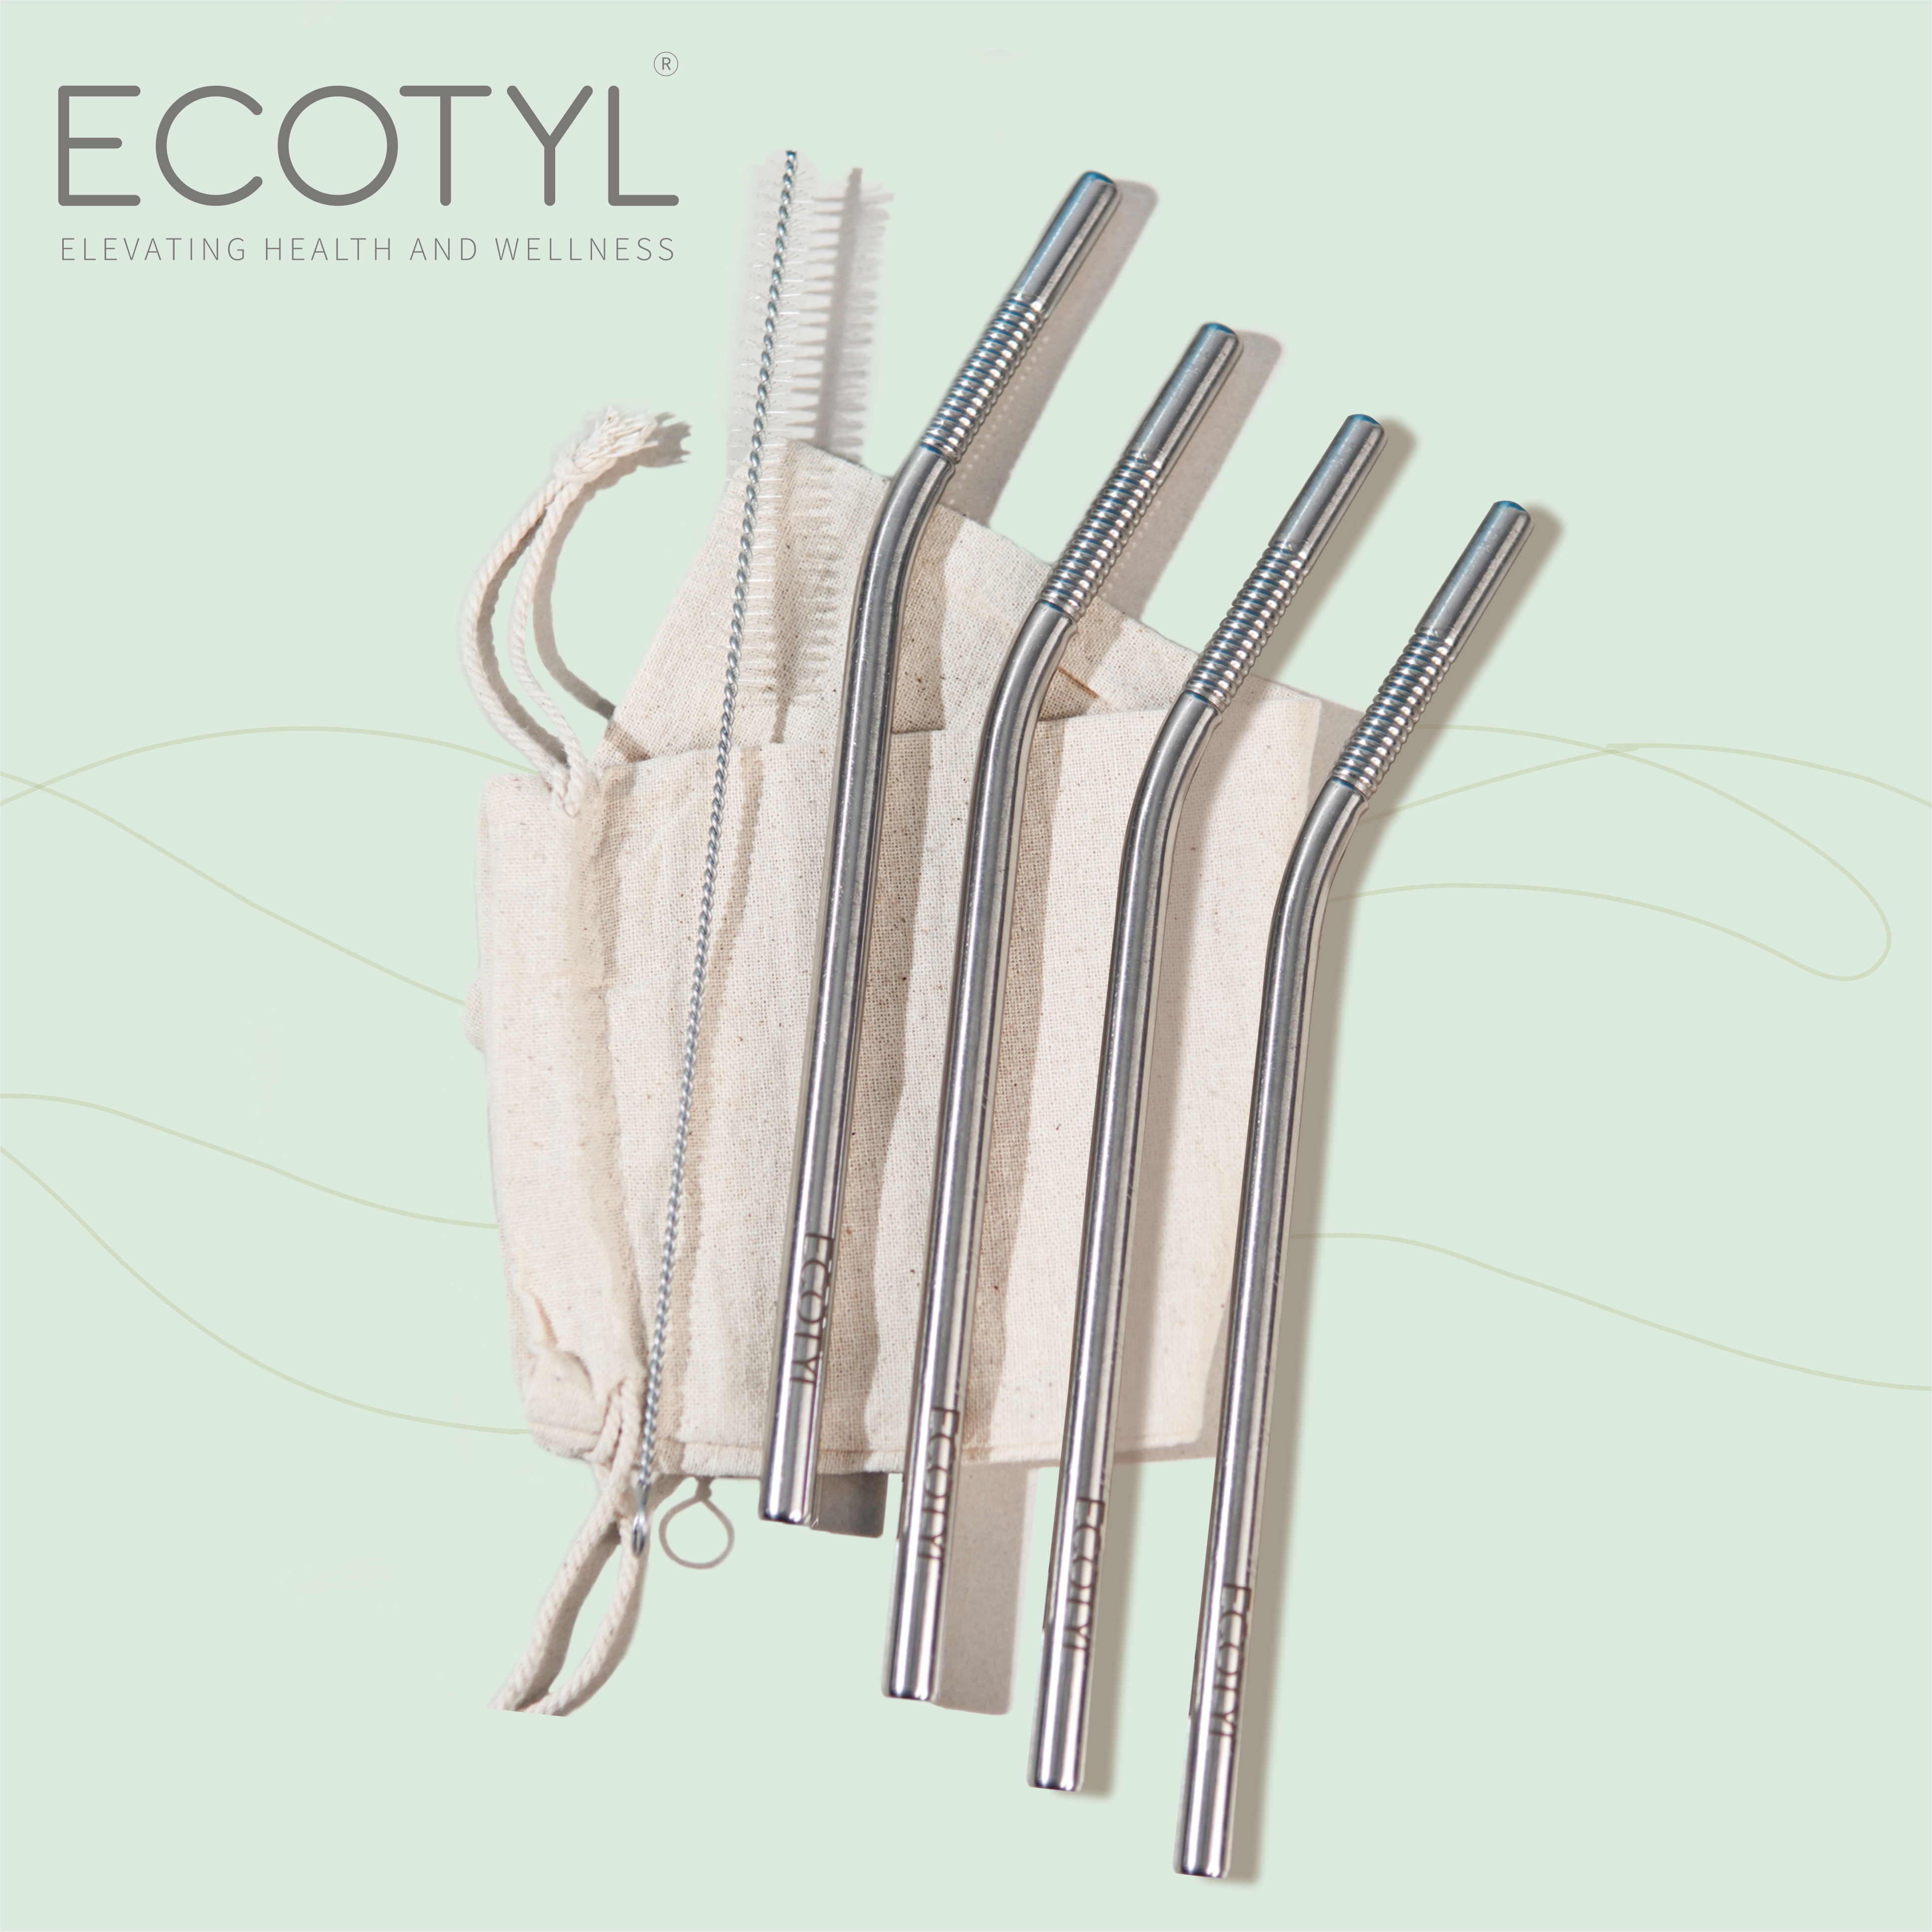 Ecotyl Stainless Steel Straw Bent with Cleaning Brush | Reusable Straws | Set of 4